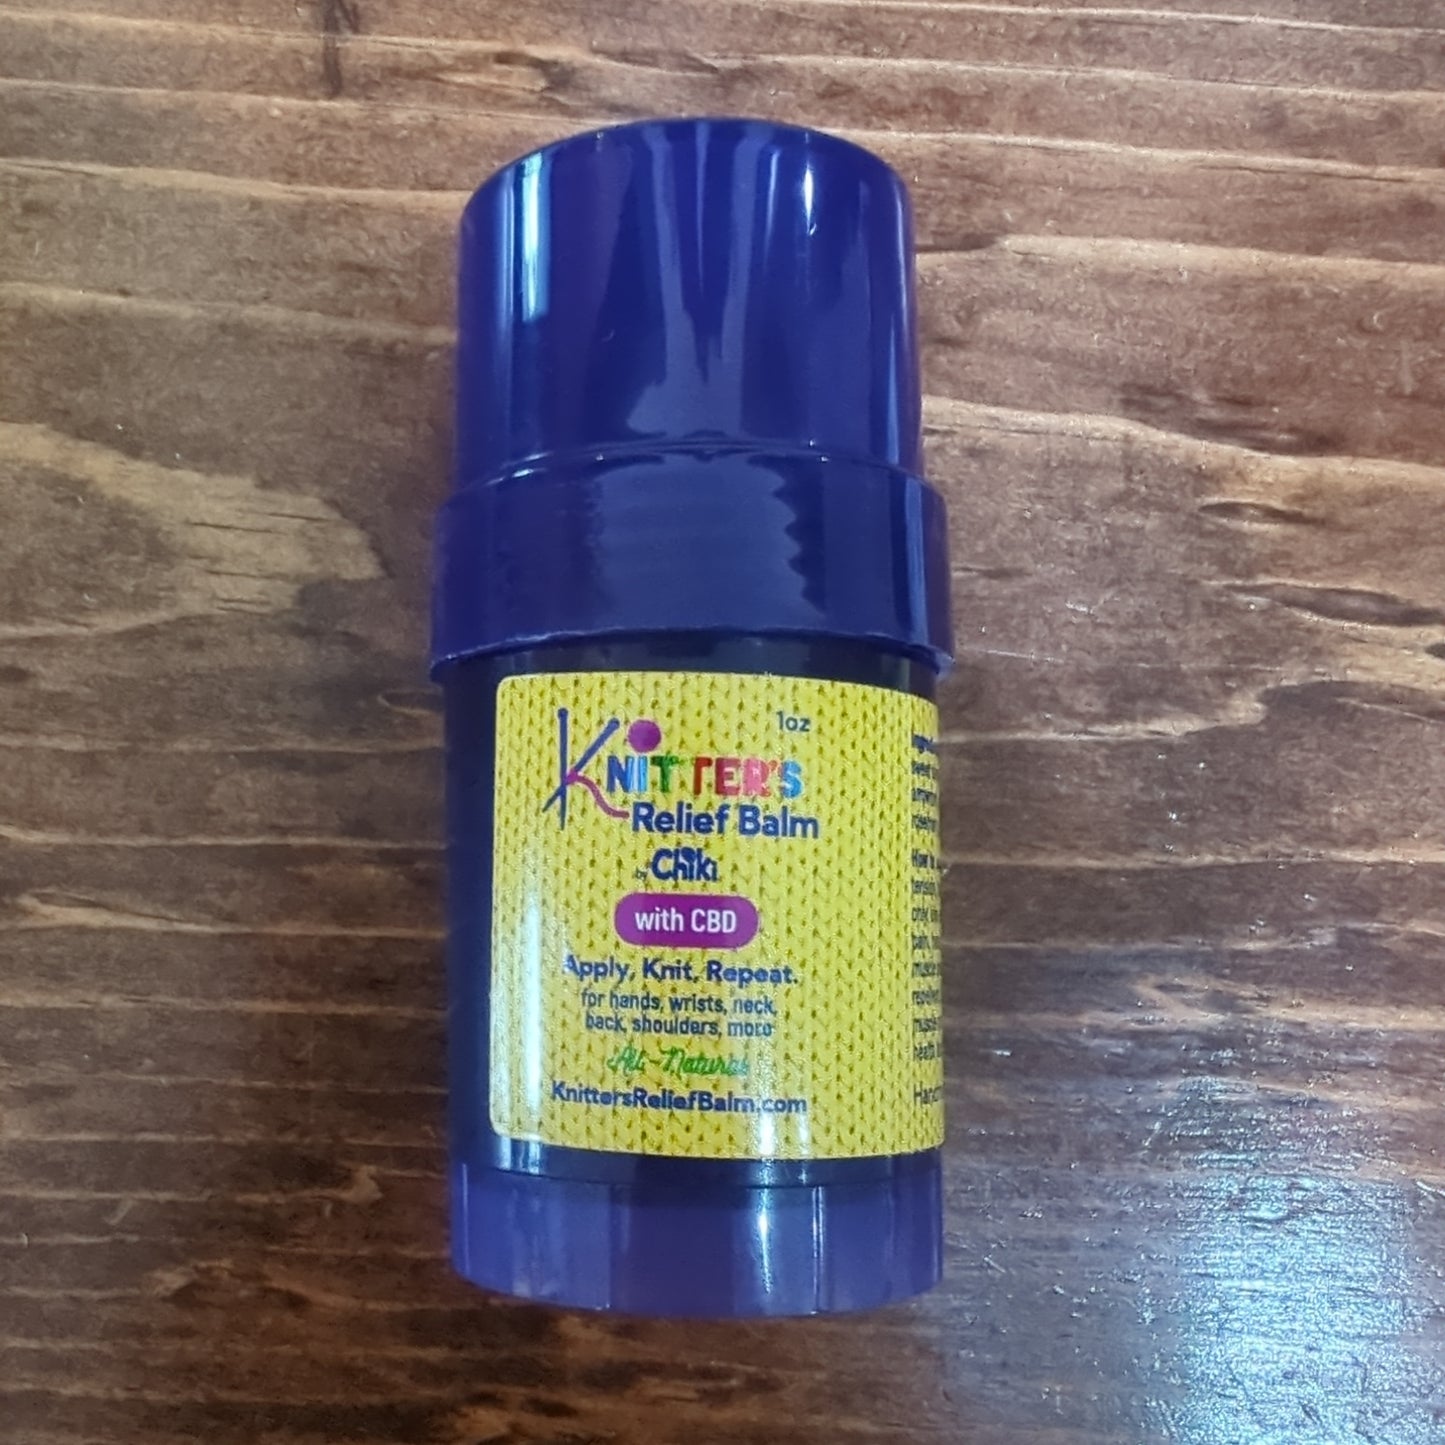 Knitter's Relief Balm with CBD